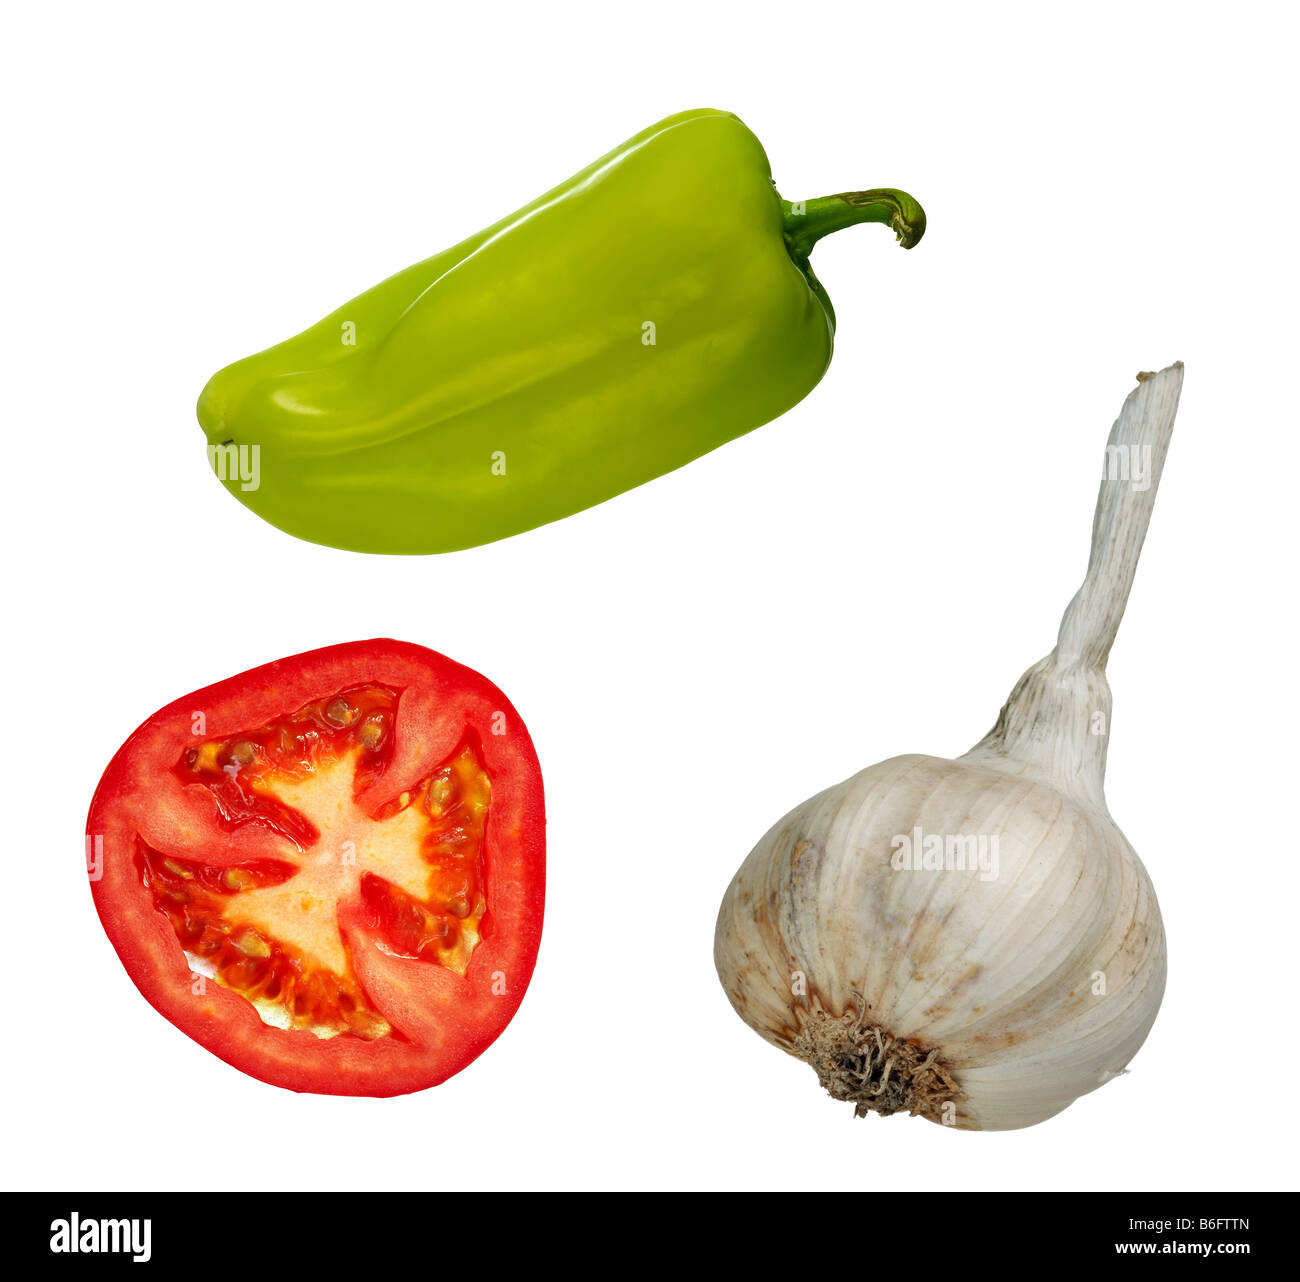 Detail of the vegetables - slice of tomato, garlic and green pepper - isolated Stock Photo